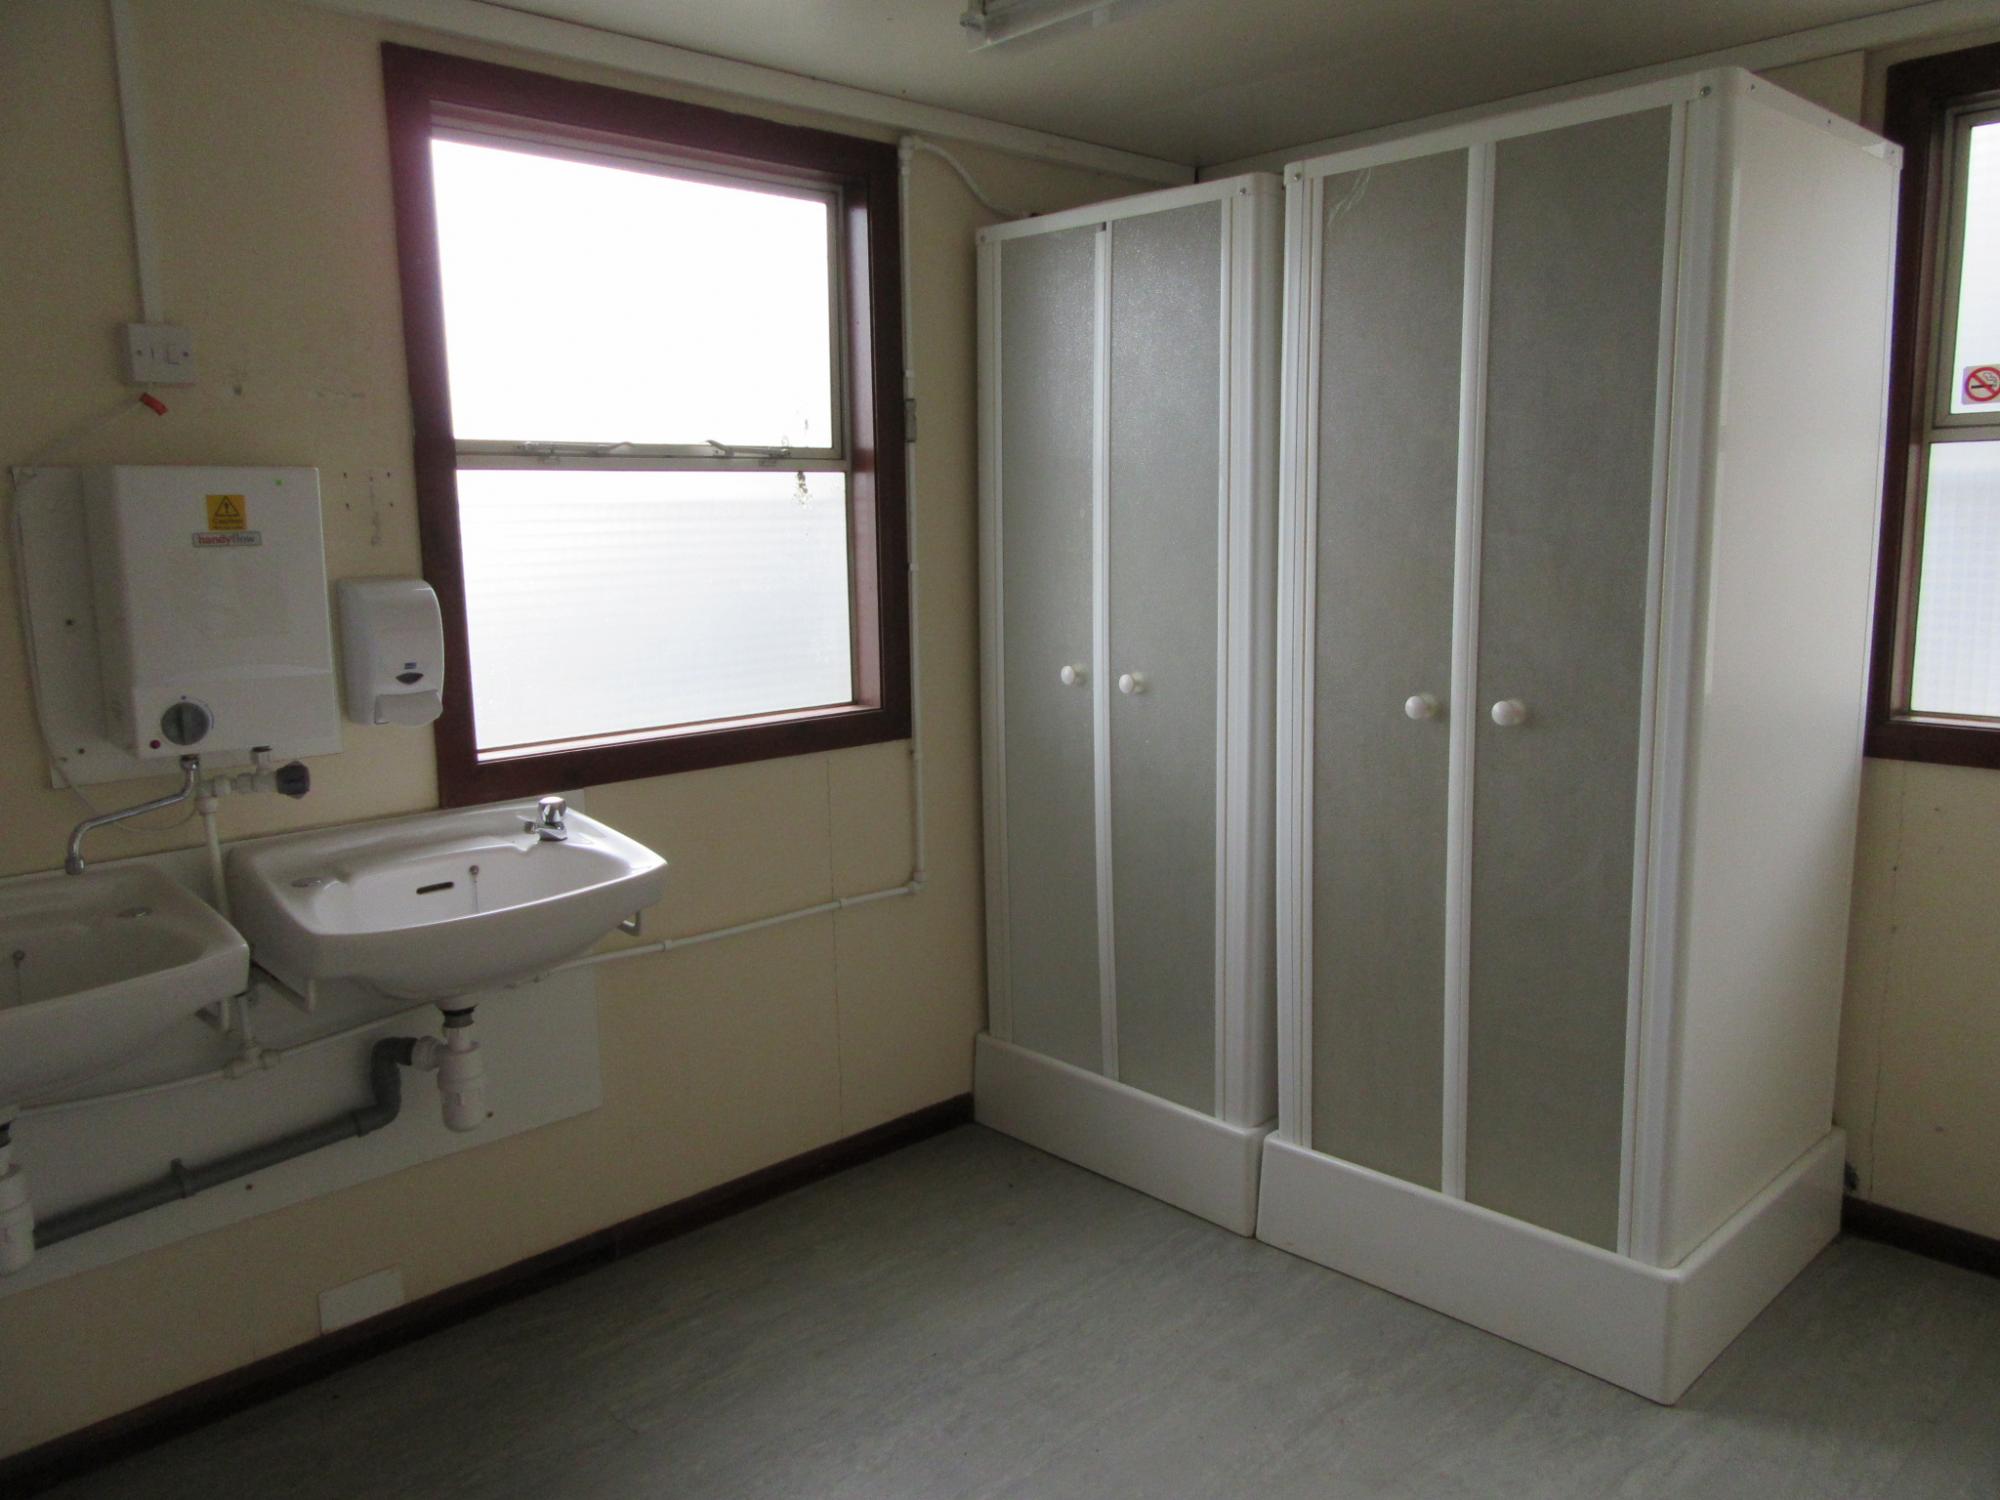 Individual toilet and shower blocks